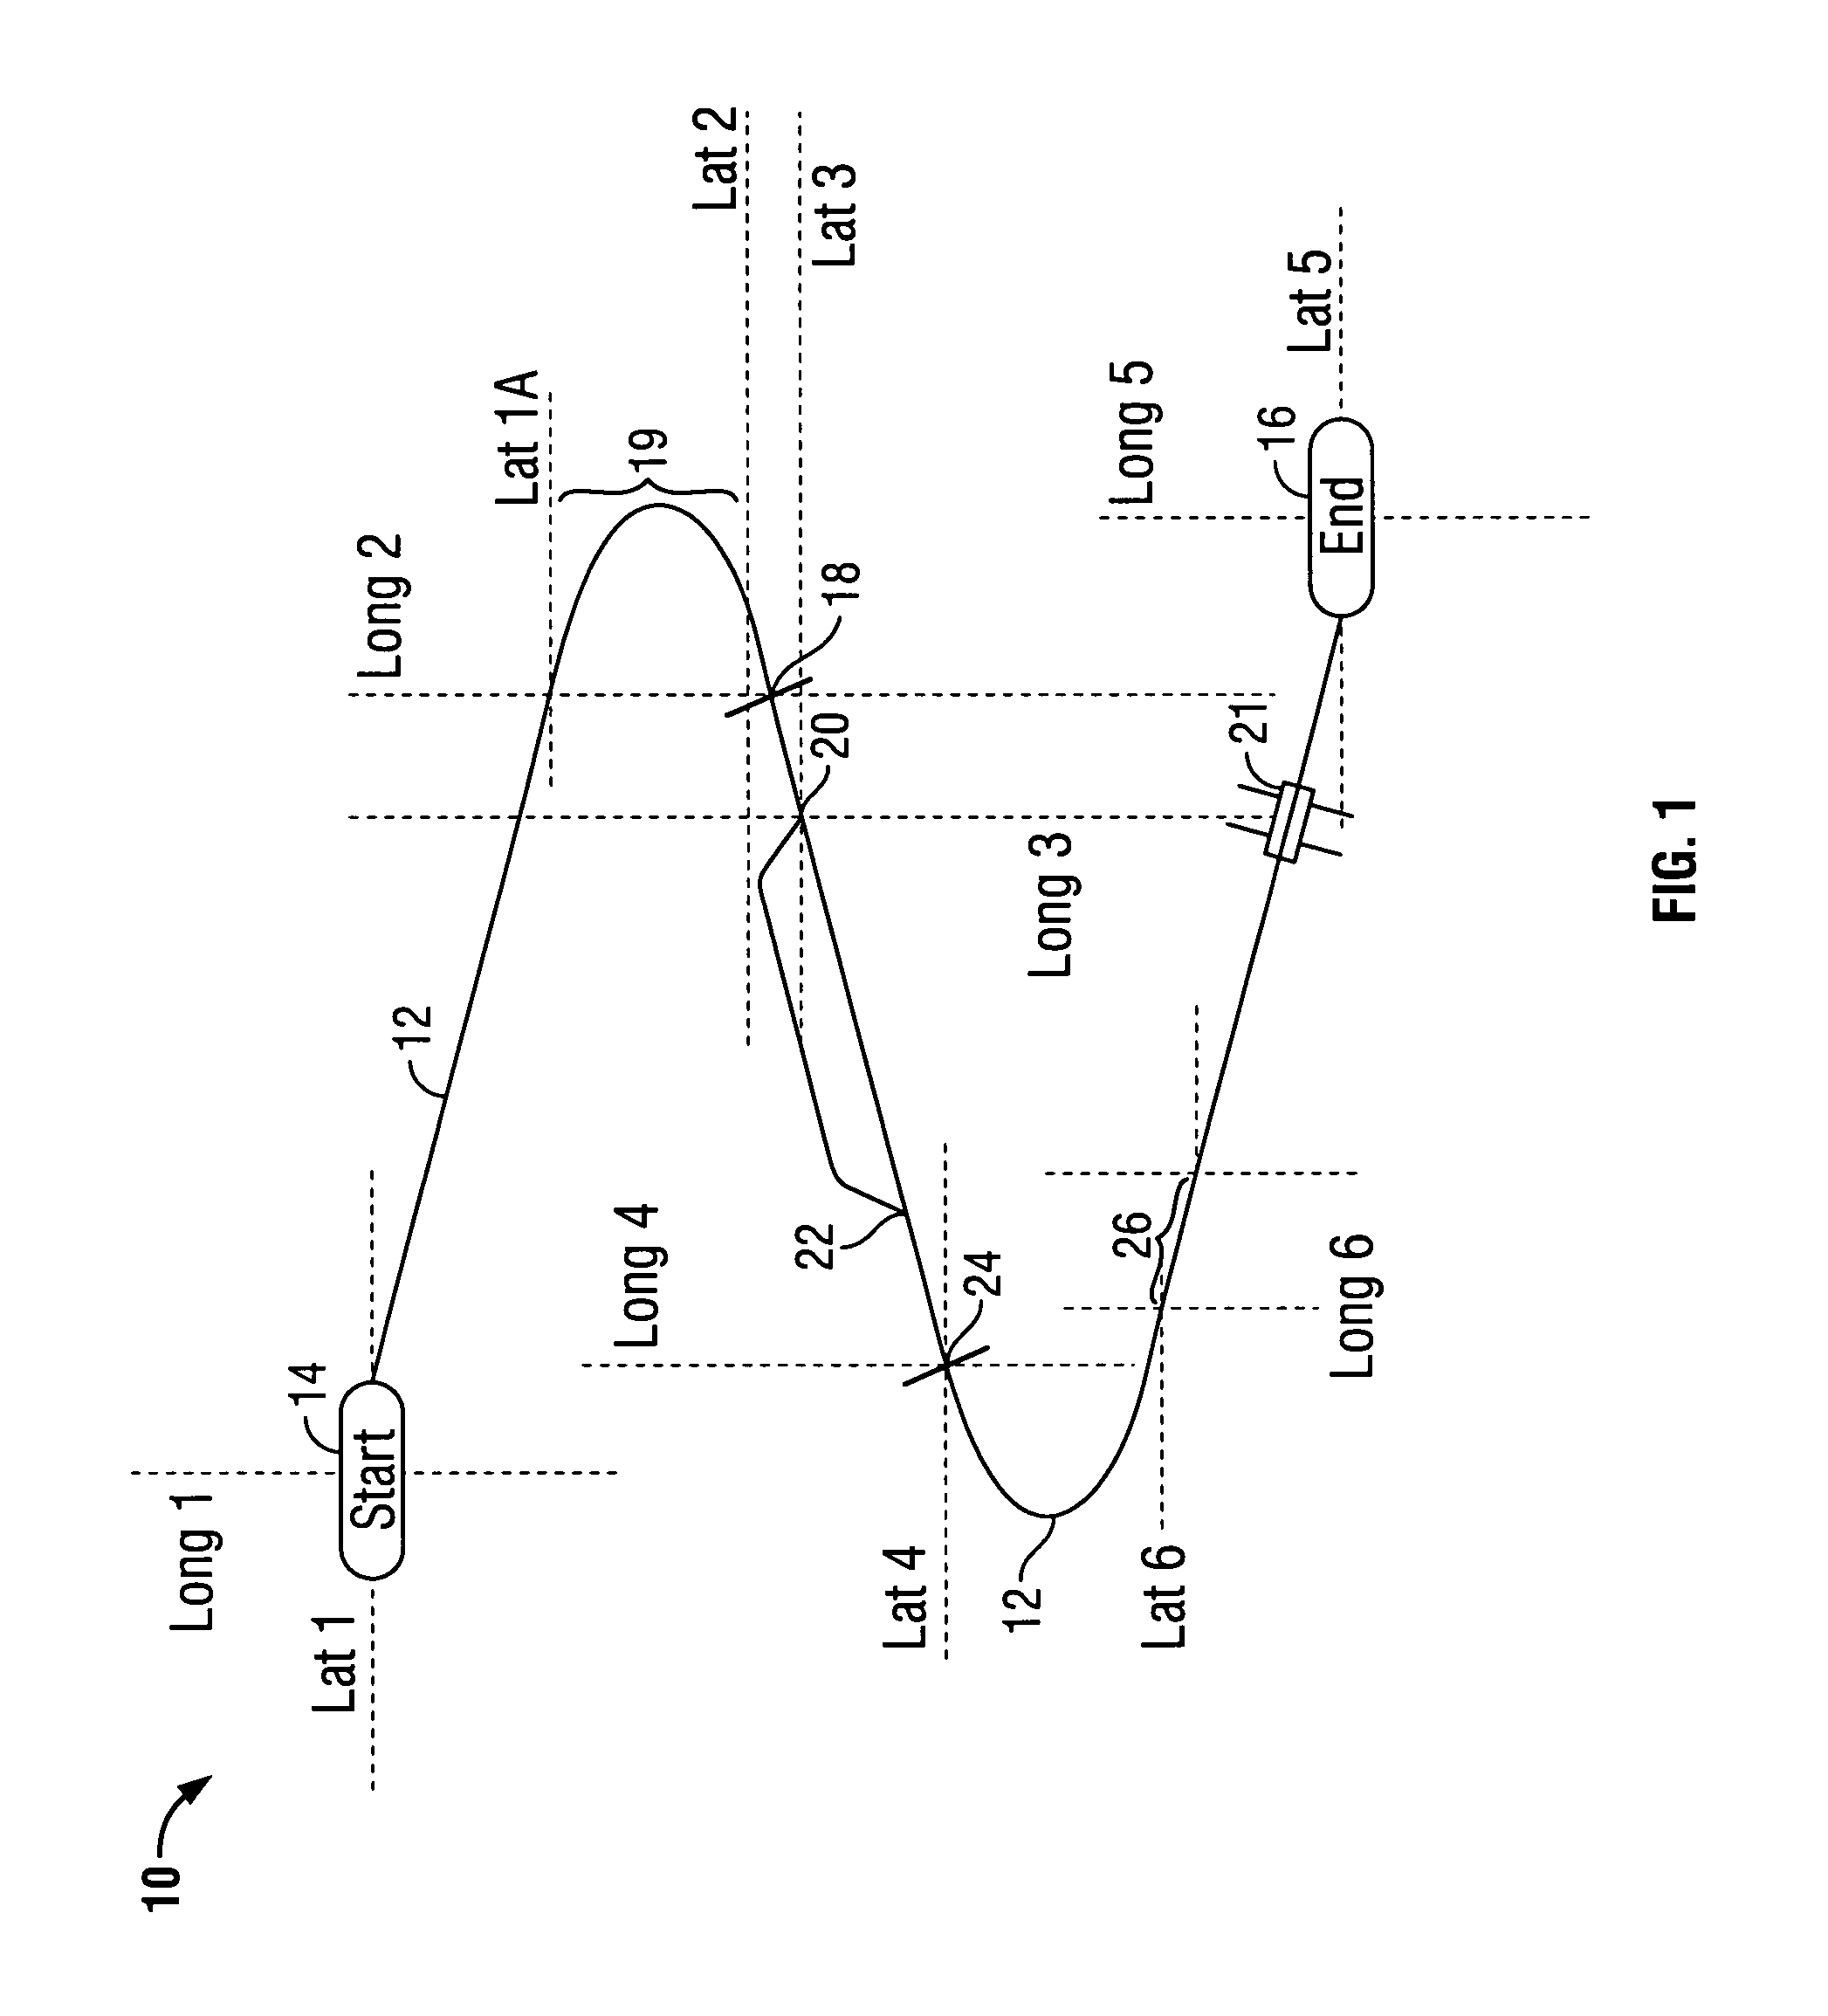 Method and apparatus for simulating a train and track